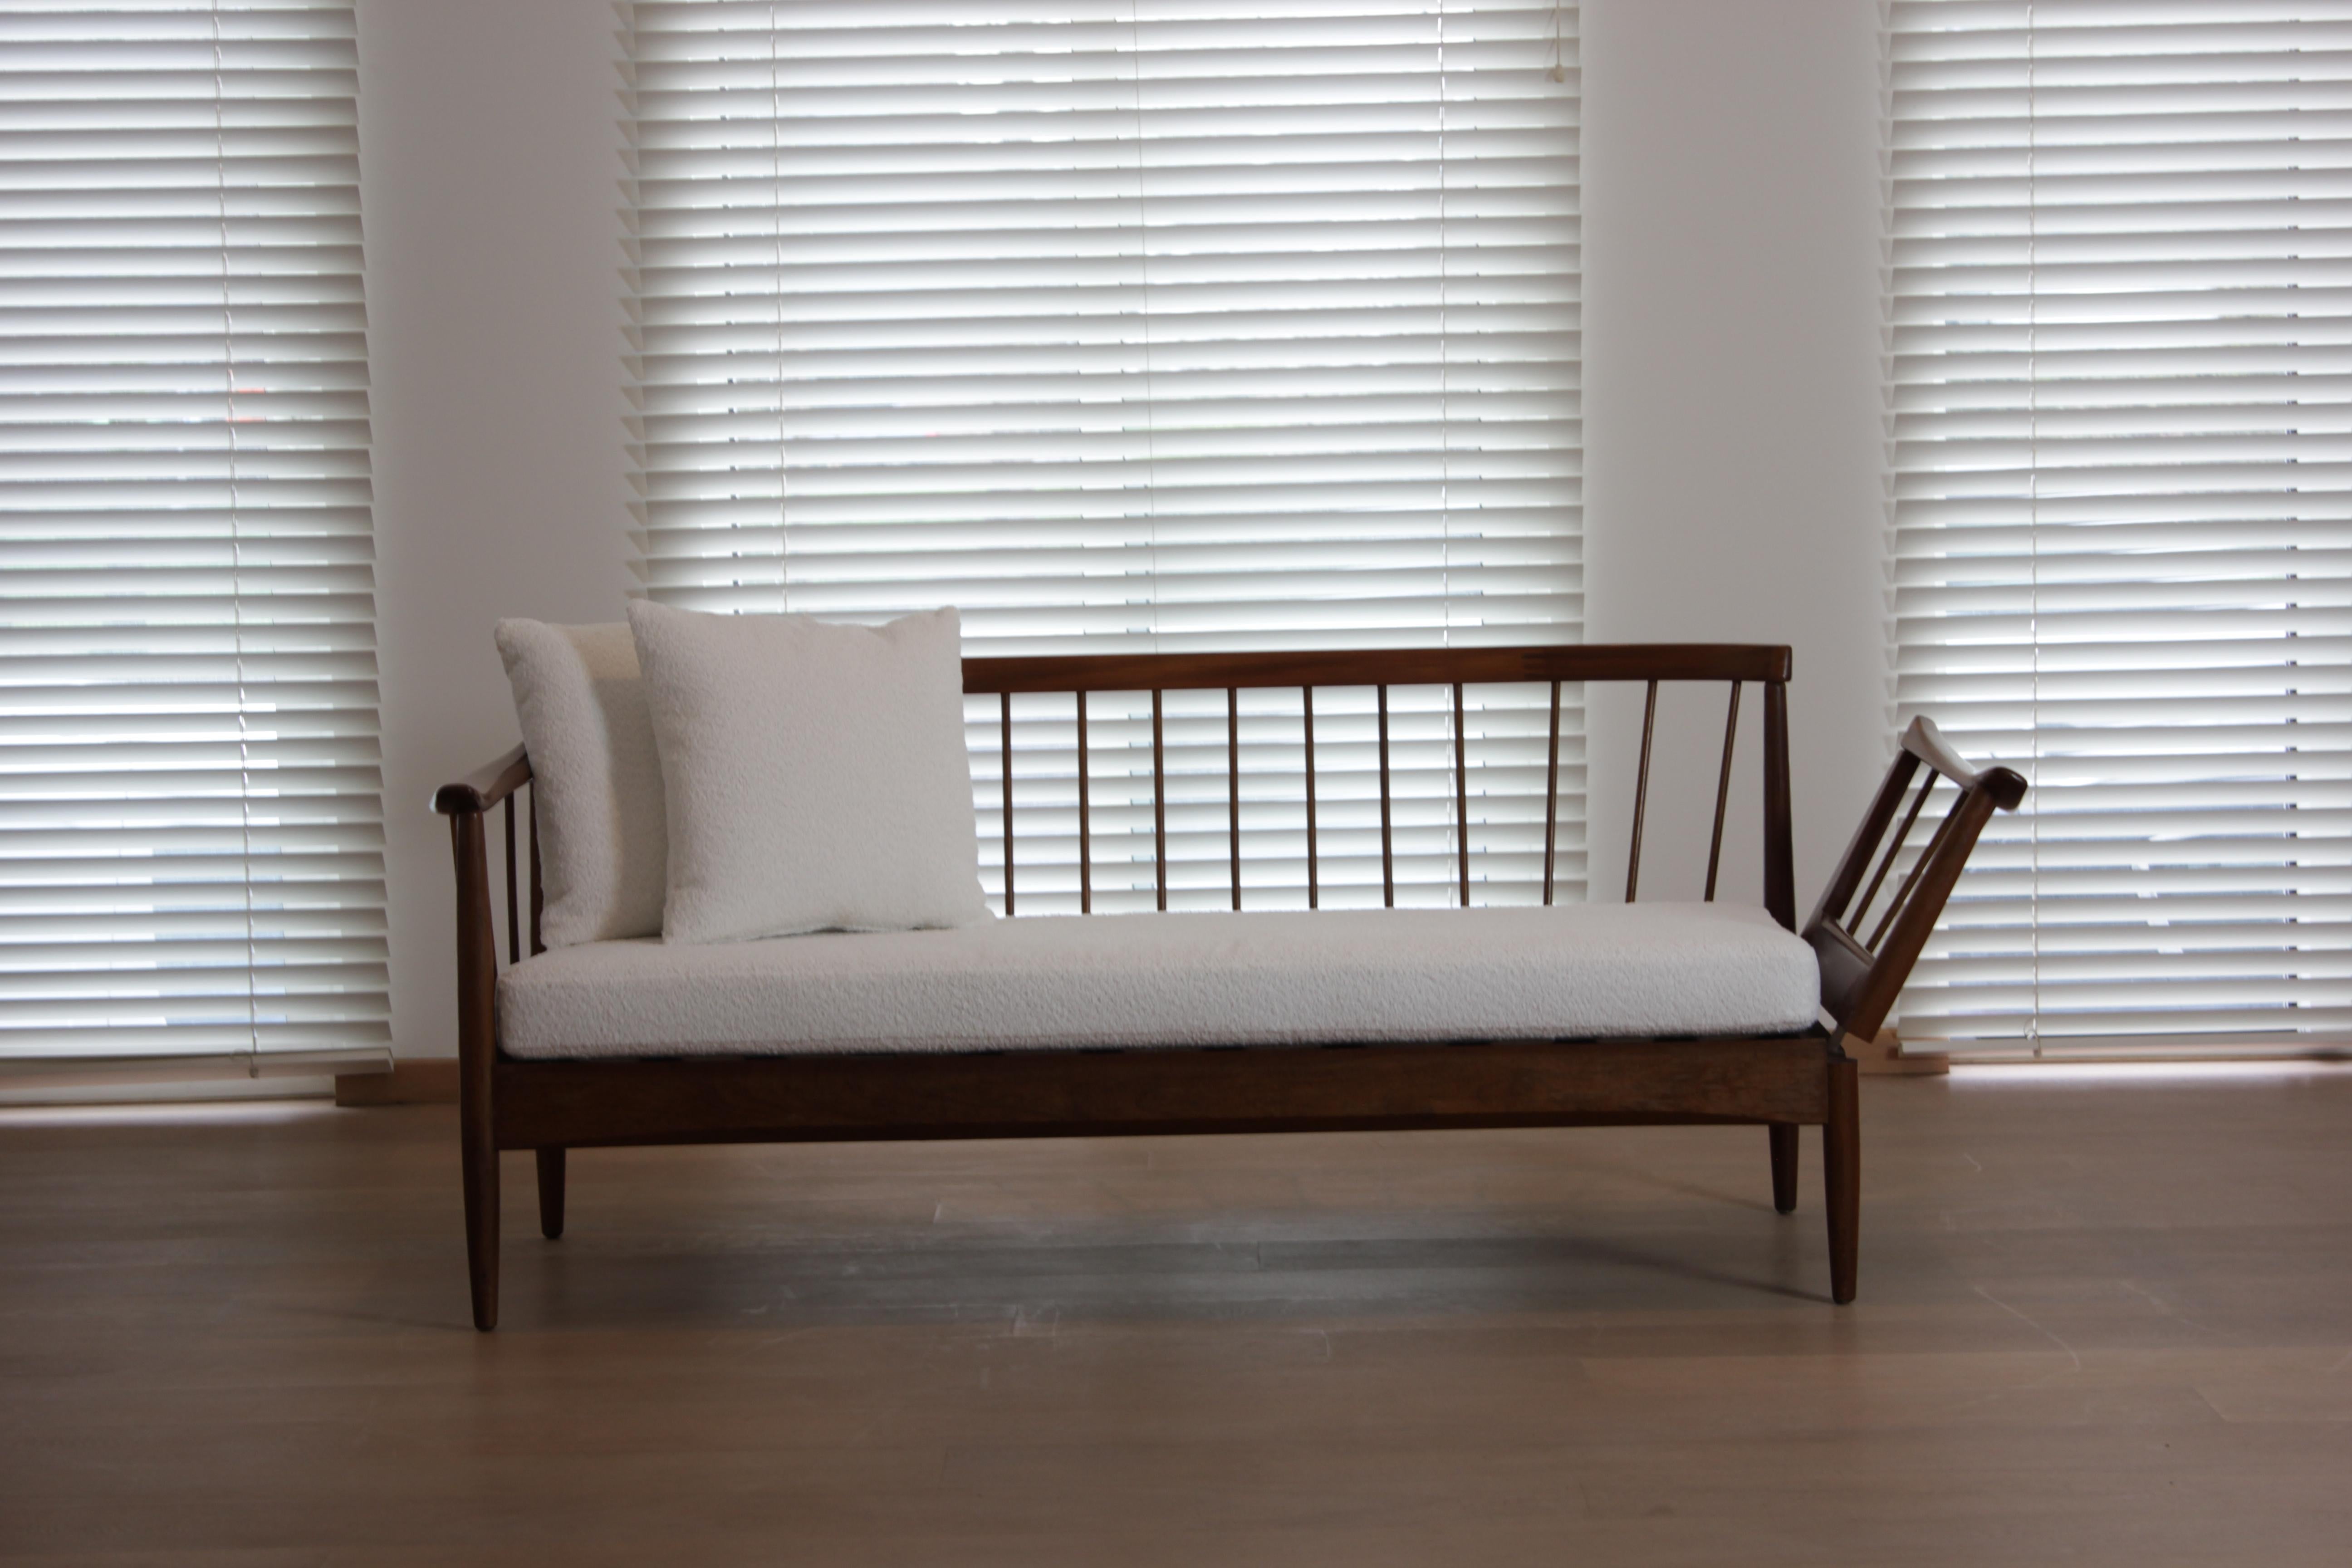 Mid 20th Century Modern Daybed by Greaves & Thomas, 1960s For Sale 2